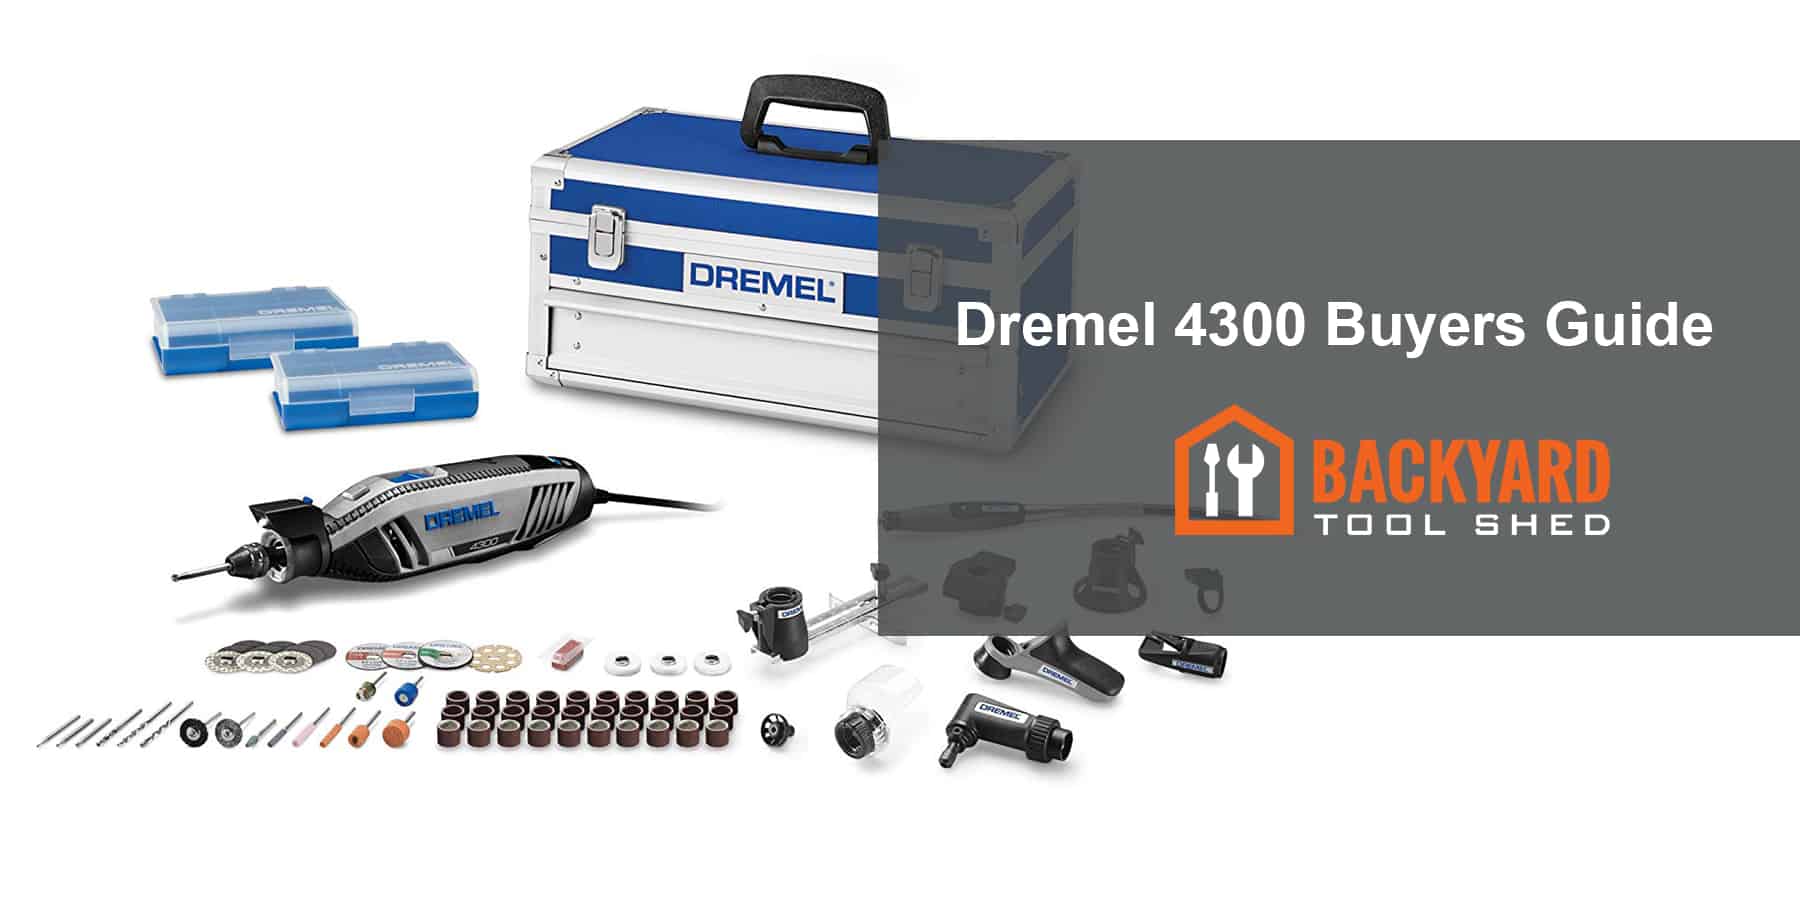 Dremel 4300 Buyers Guide - Detailed Review [March 2019]